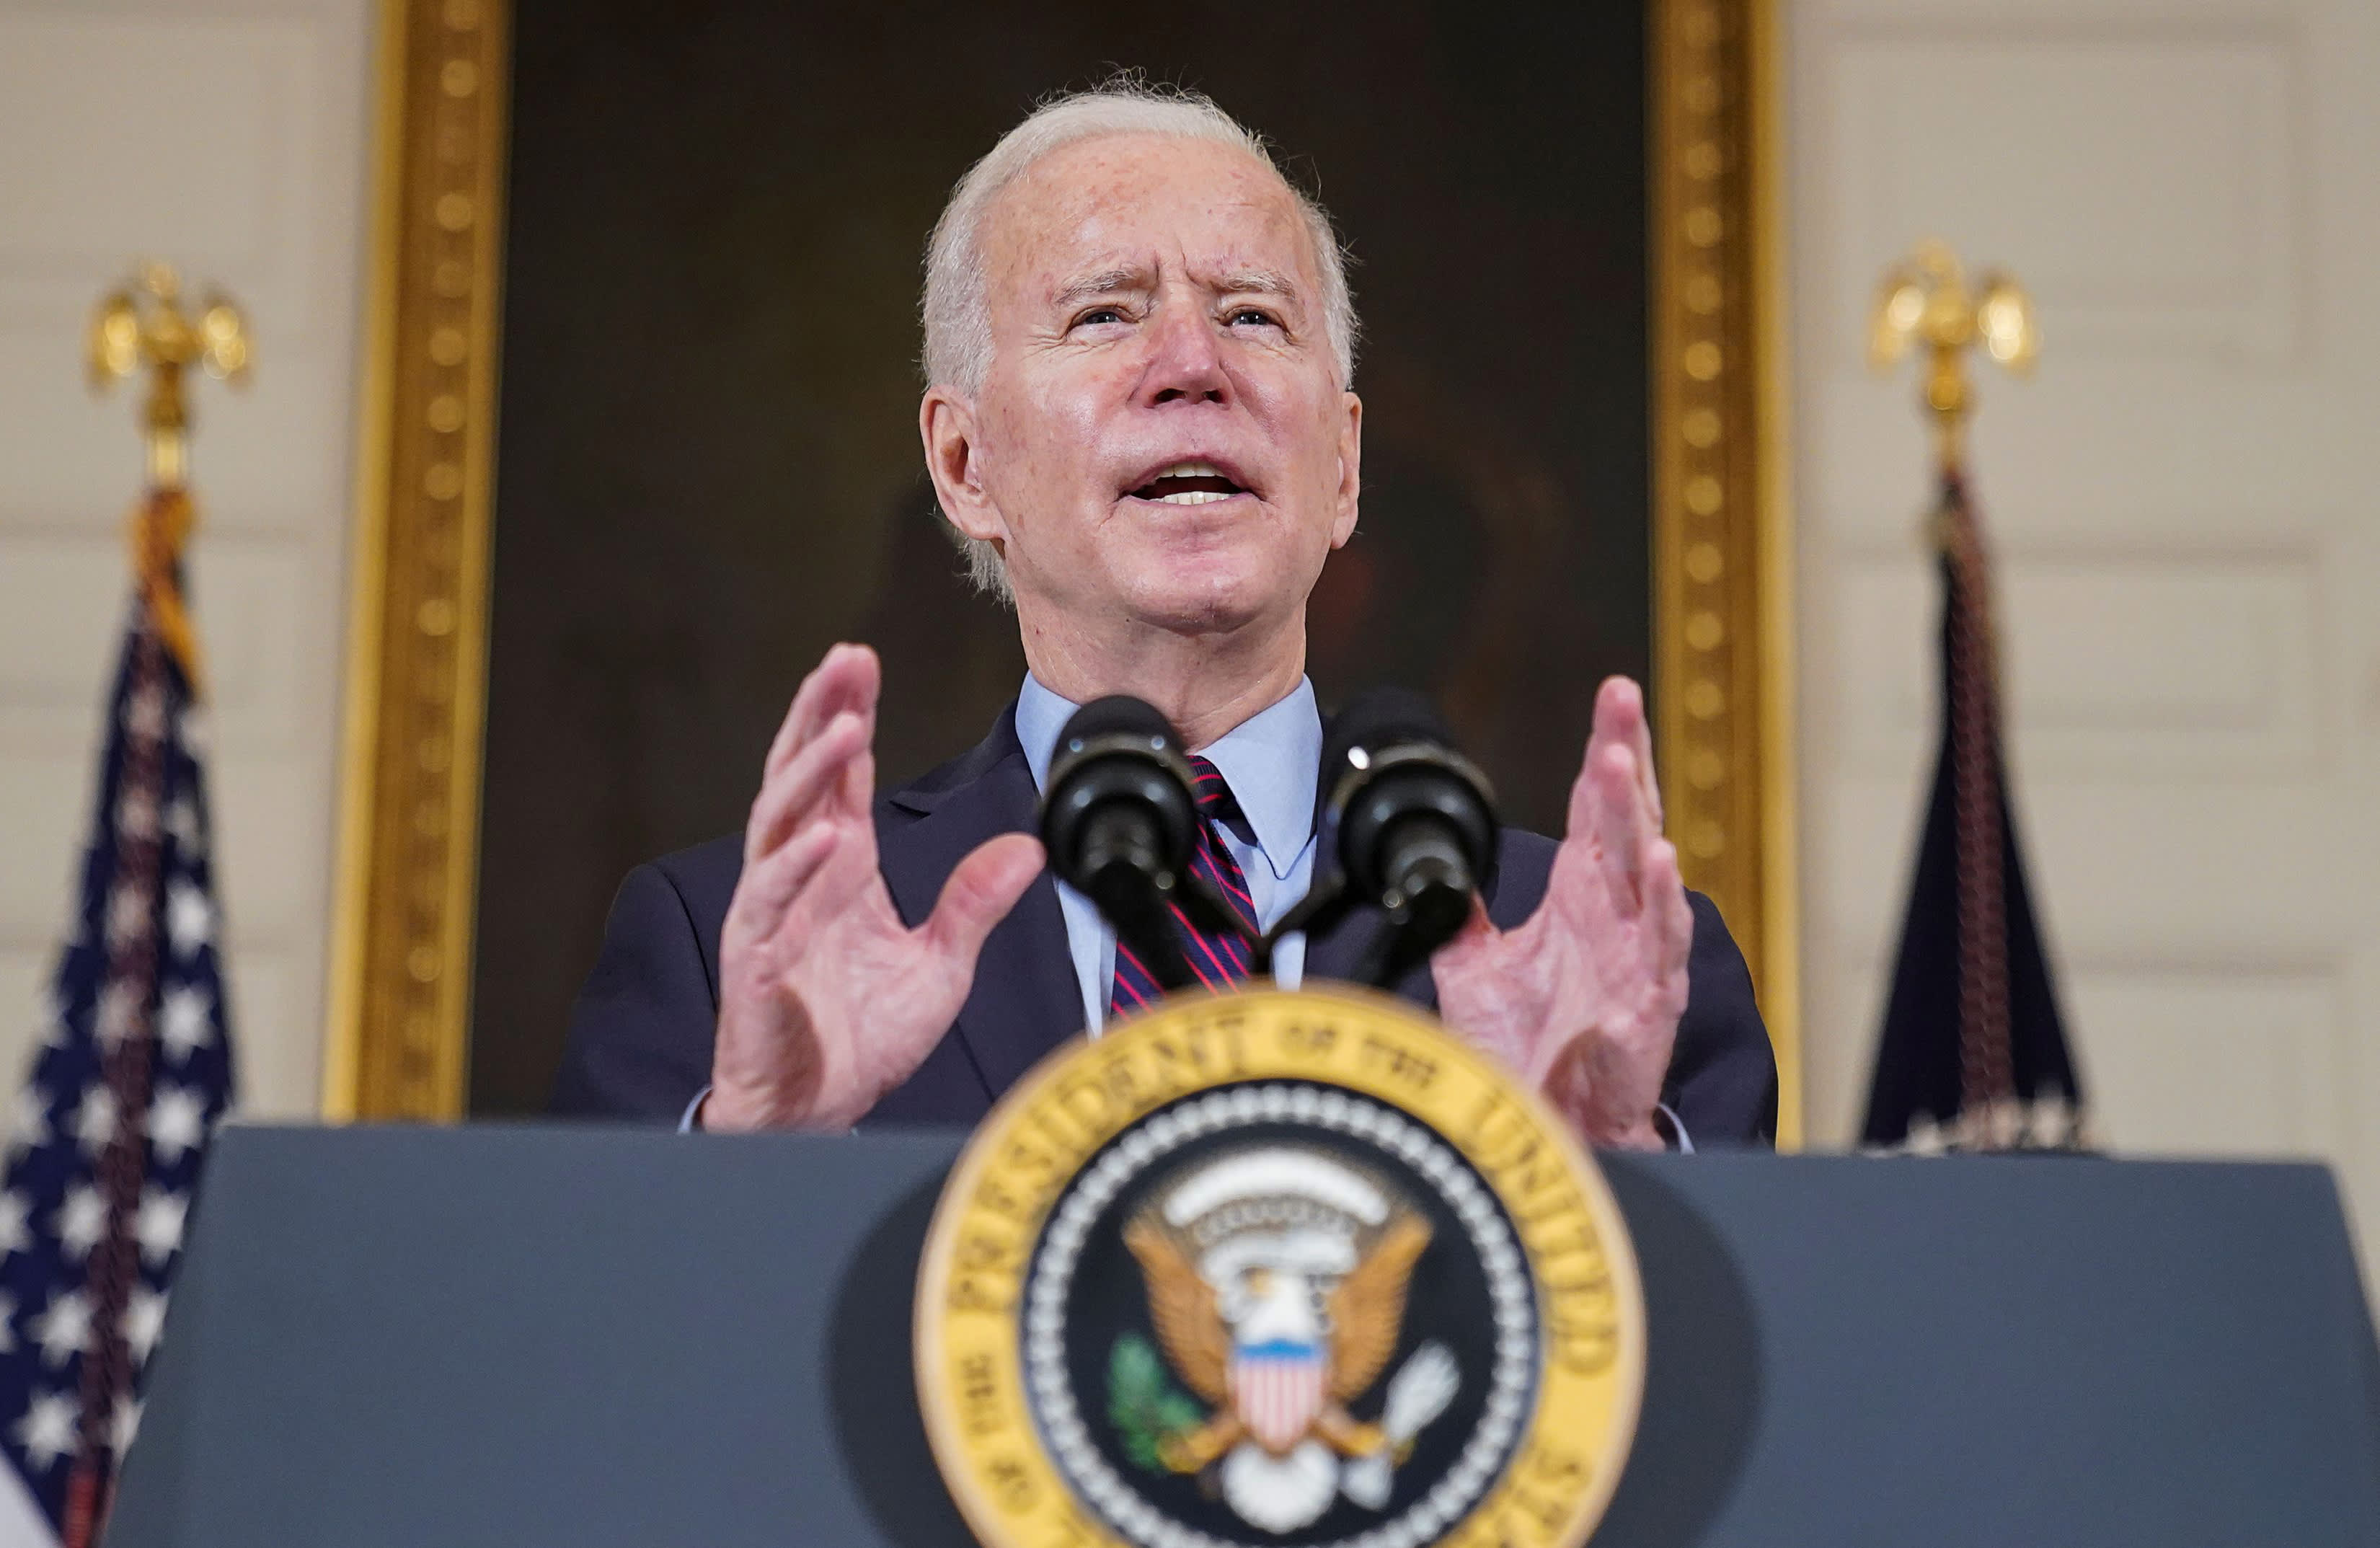 Biden to Request Supply Chain Review to Assess US Dependence on Semiconductors Abroad